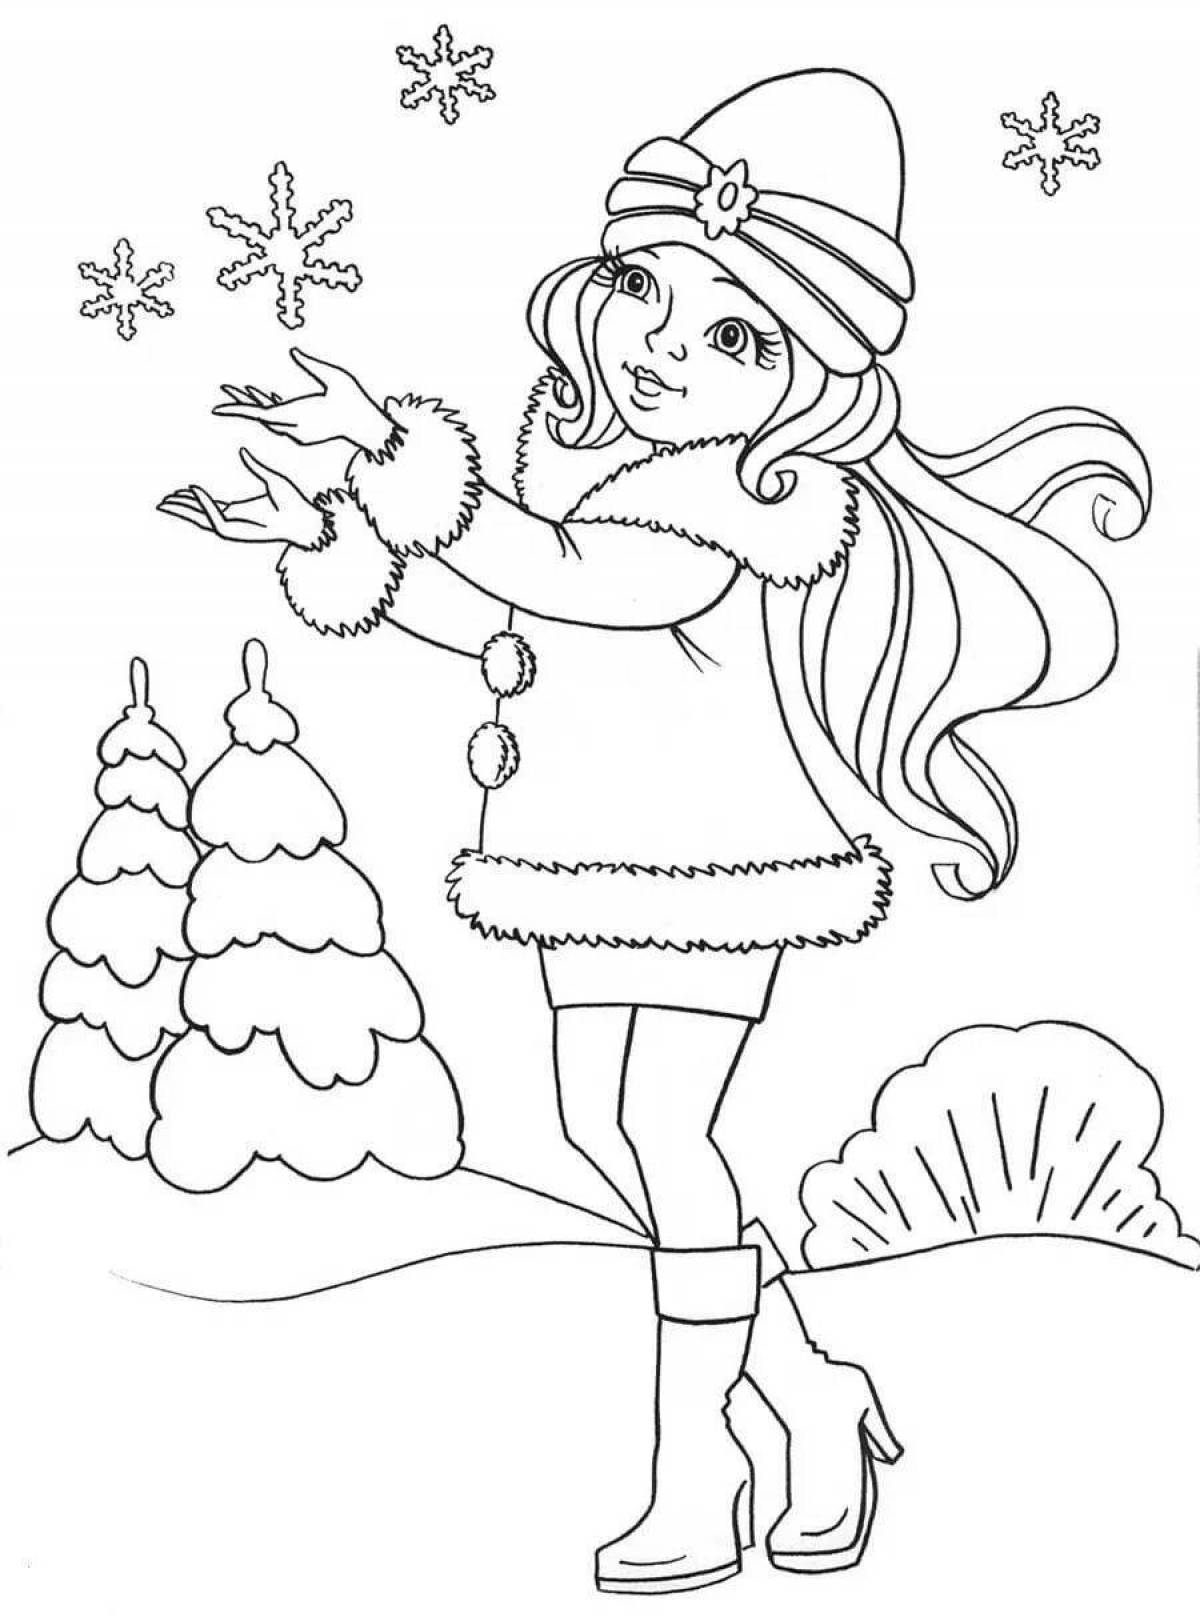 Colourful coloring book for children 6 years old winter